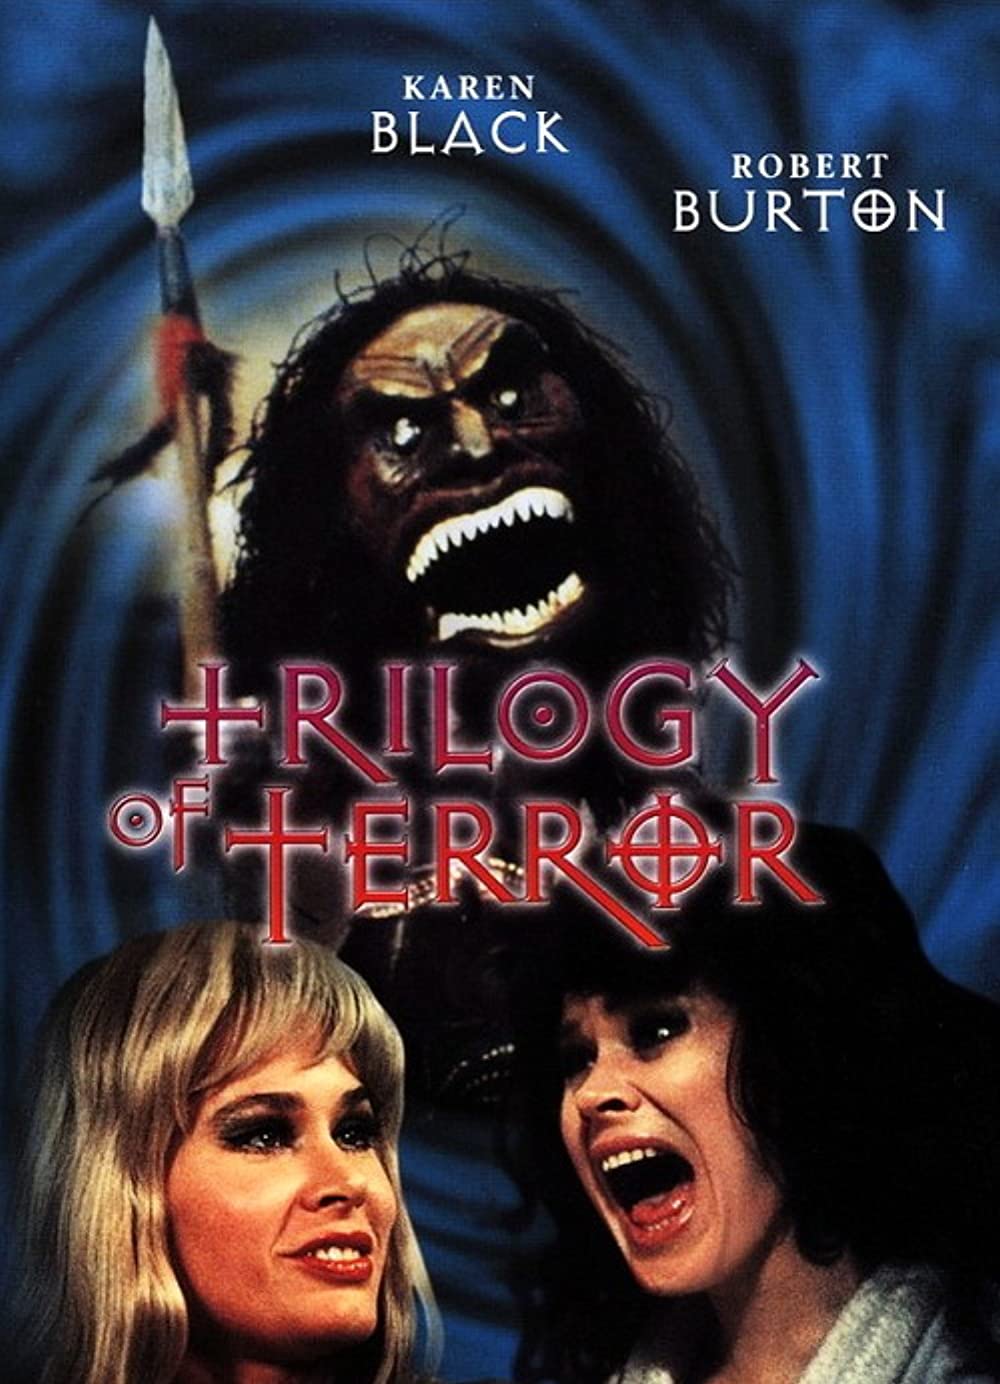 It's Time To Feed The Trilogy of Terror (1975)